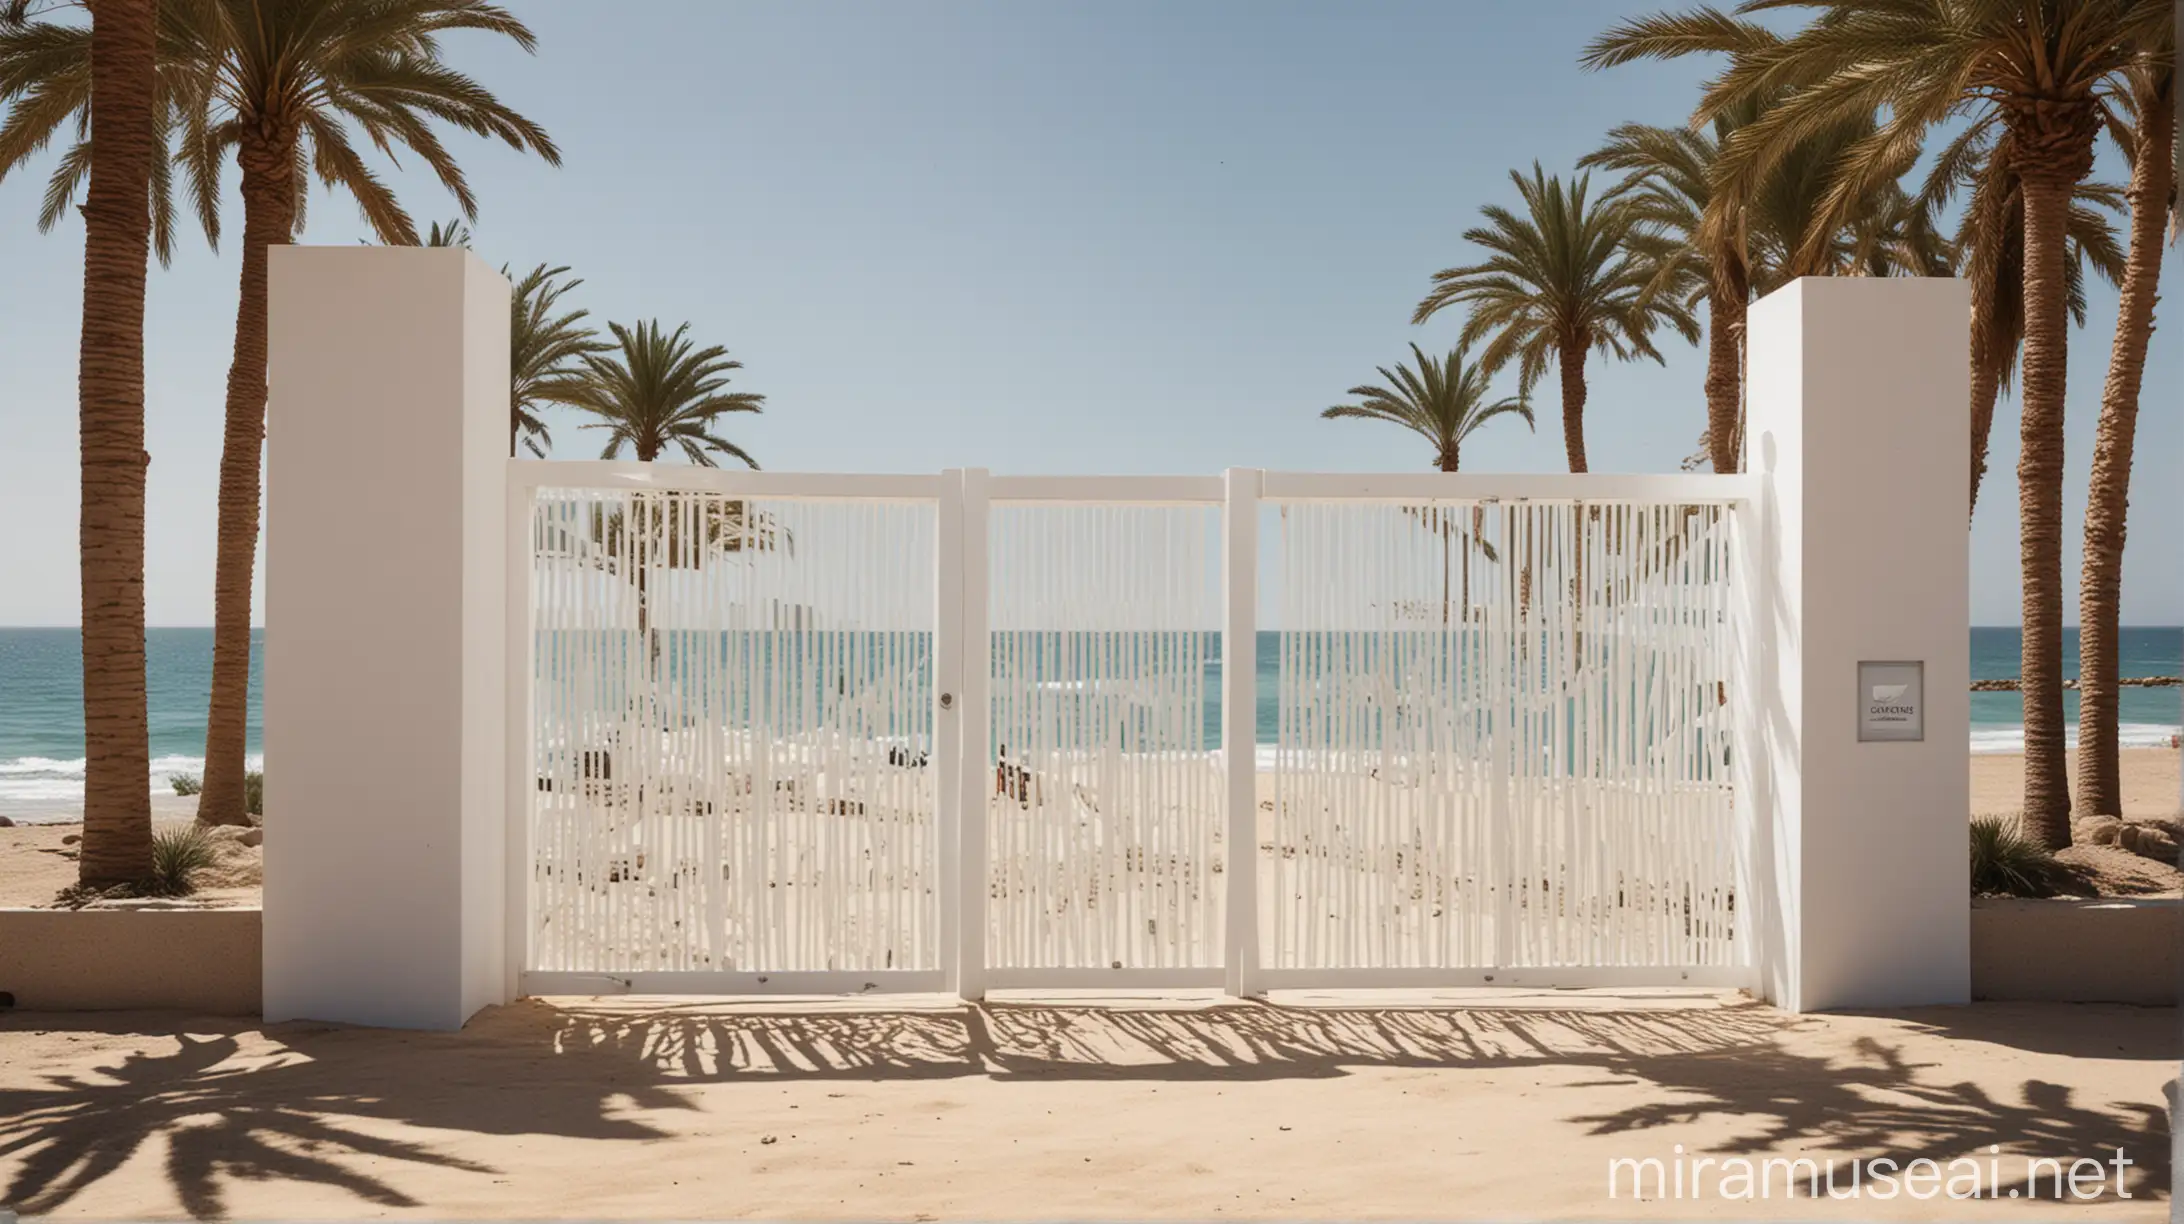 Generate a modern white gate design for a public beach in ain el sokhna entrance. The gate should have a sleek and minimalist aesthetic, with clean lines and a contemporary feel. Above the gate, there should be a signage carrier to display the name of the beach. The design should be inviting and modern, suitable for a beachfront entrance.